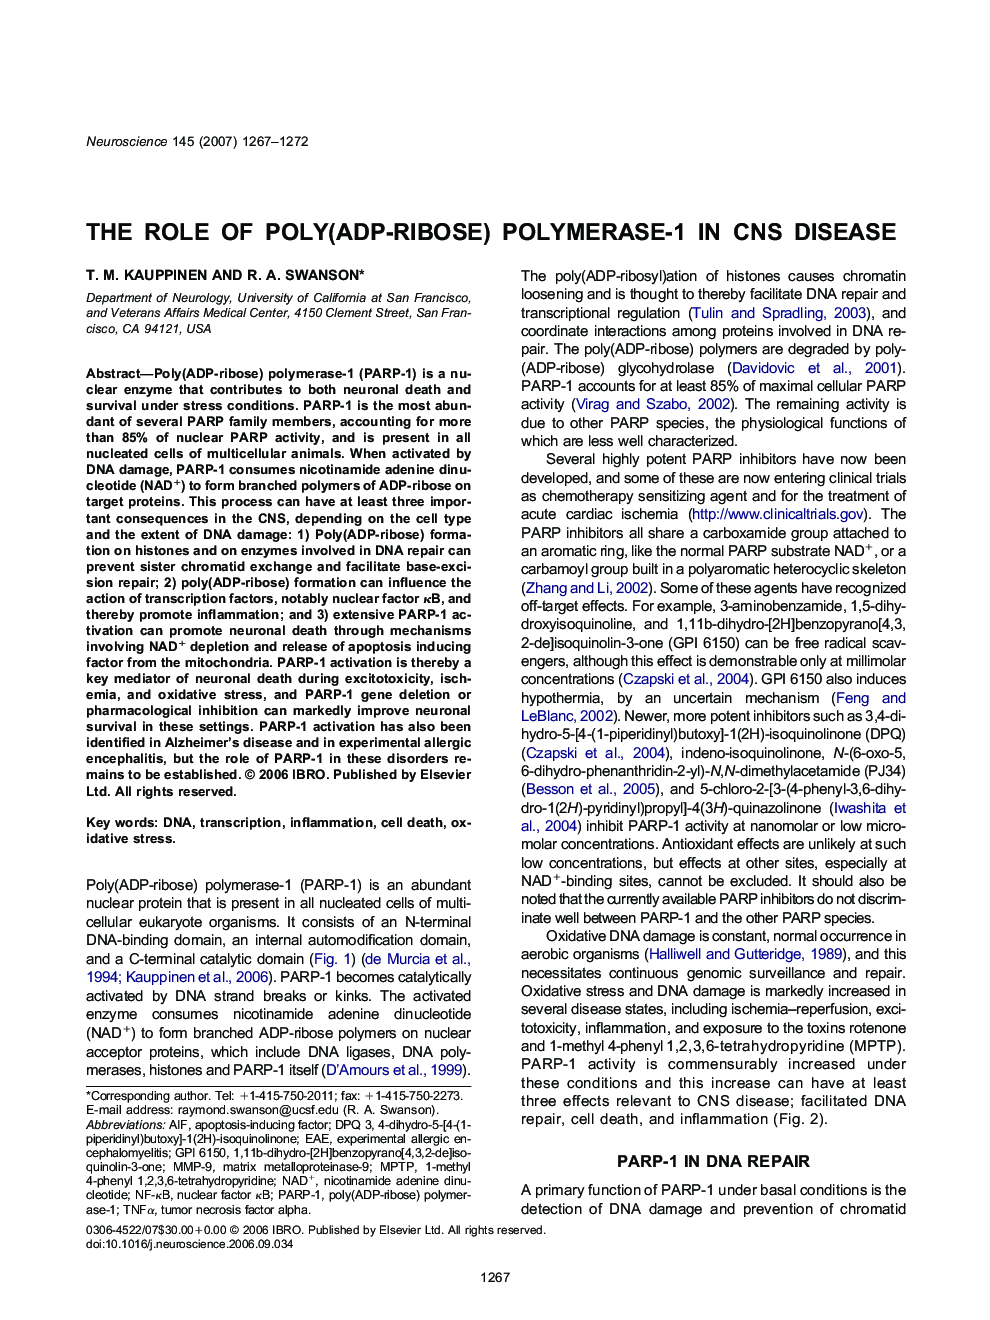 The role of poly(ADP-ribose) polymerase-1 in CNS disease